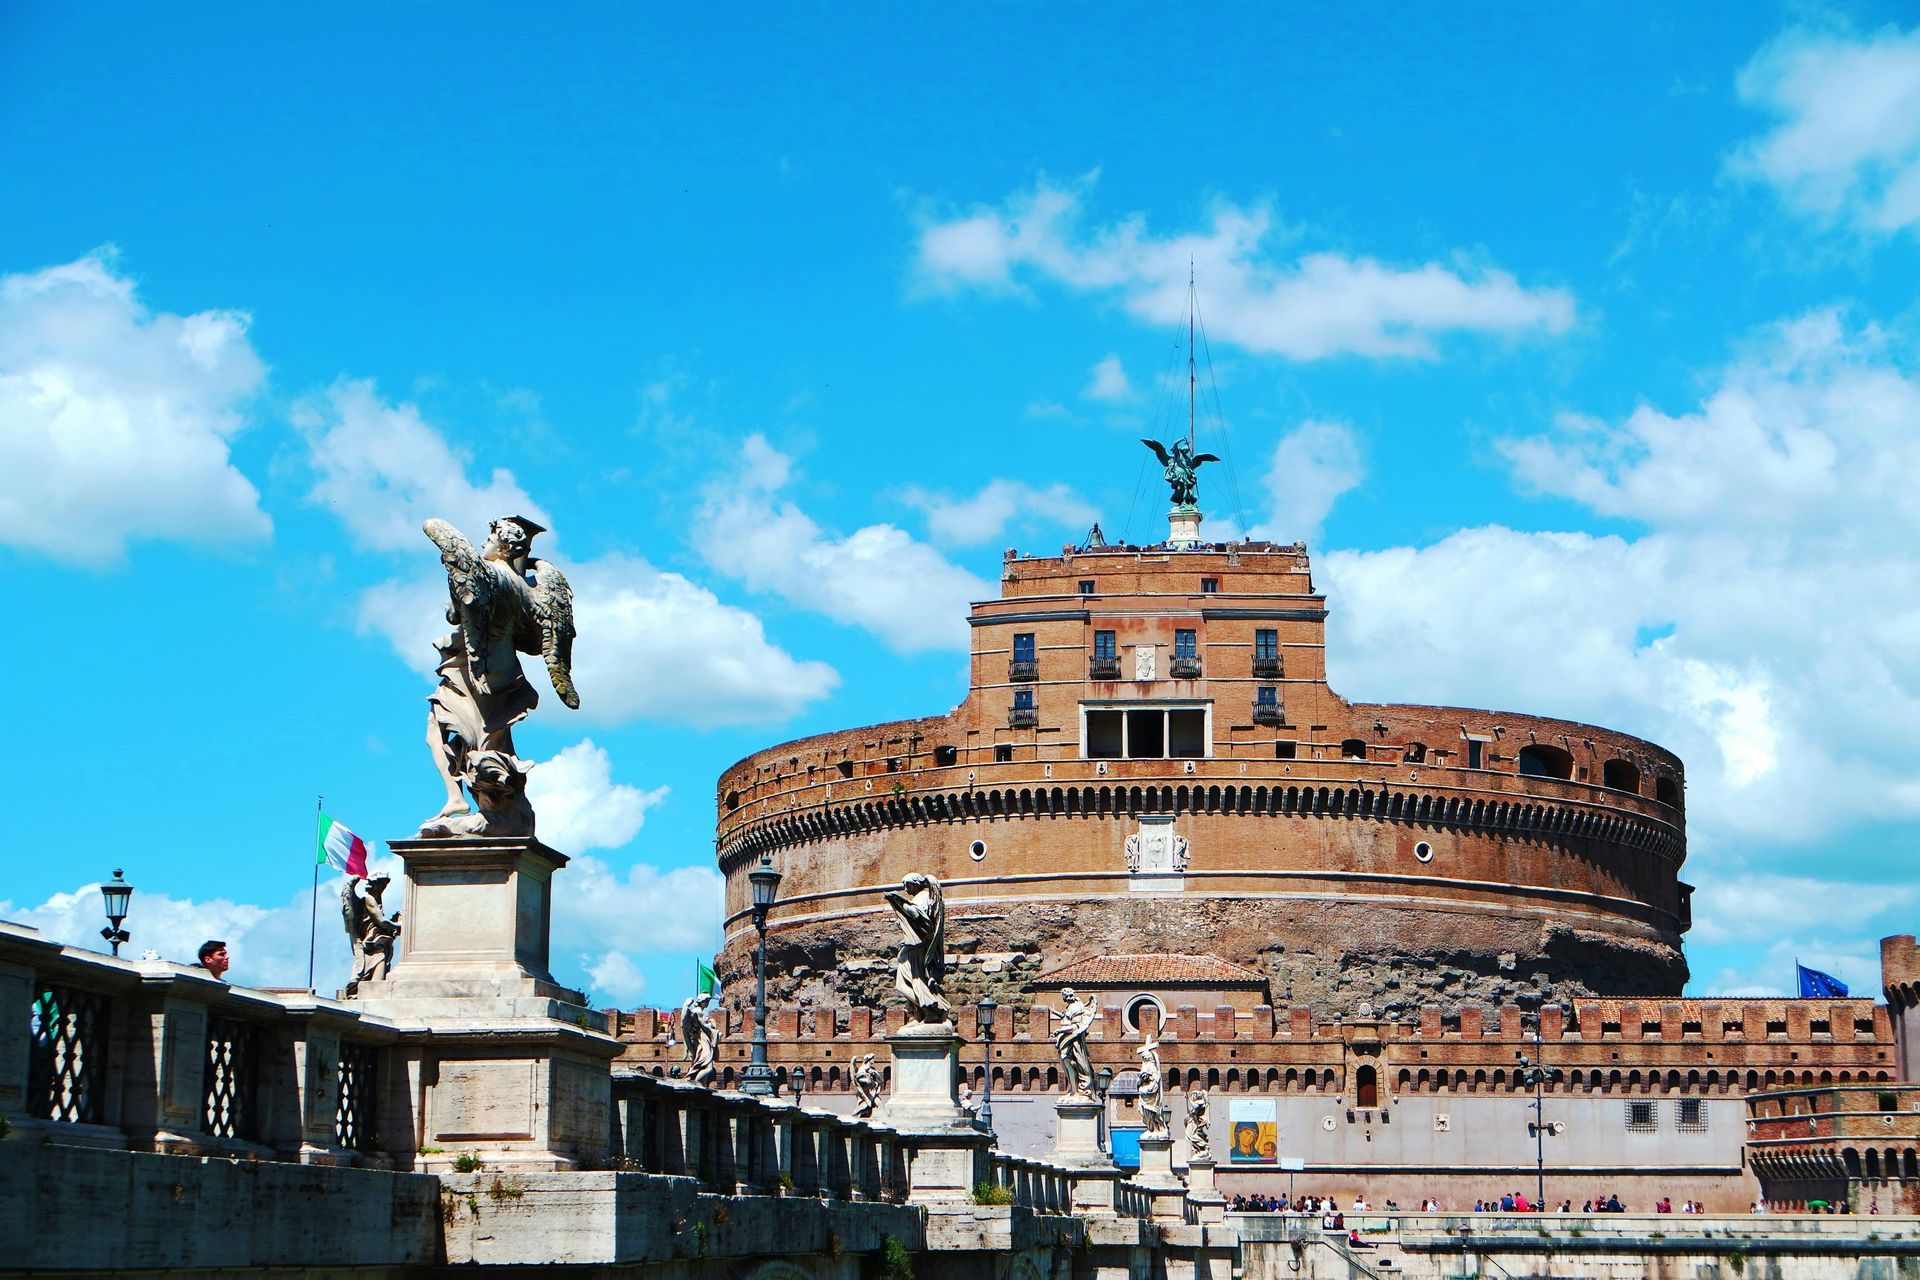 What is Castel Sant'Angelo Rome used for now?